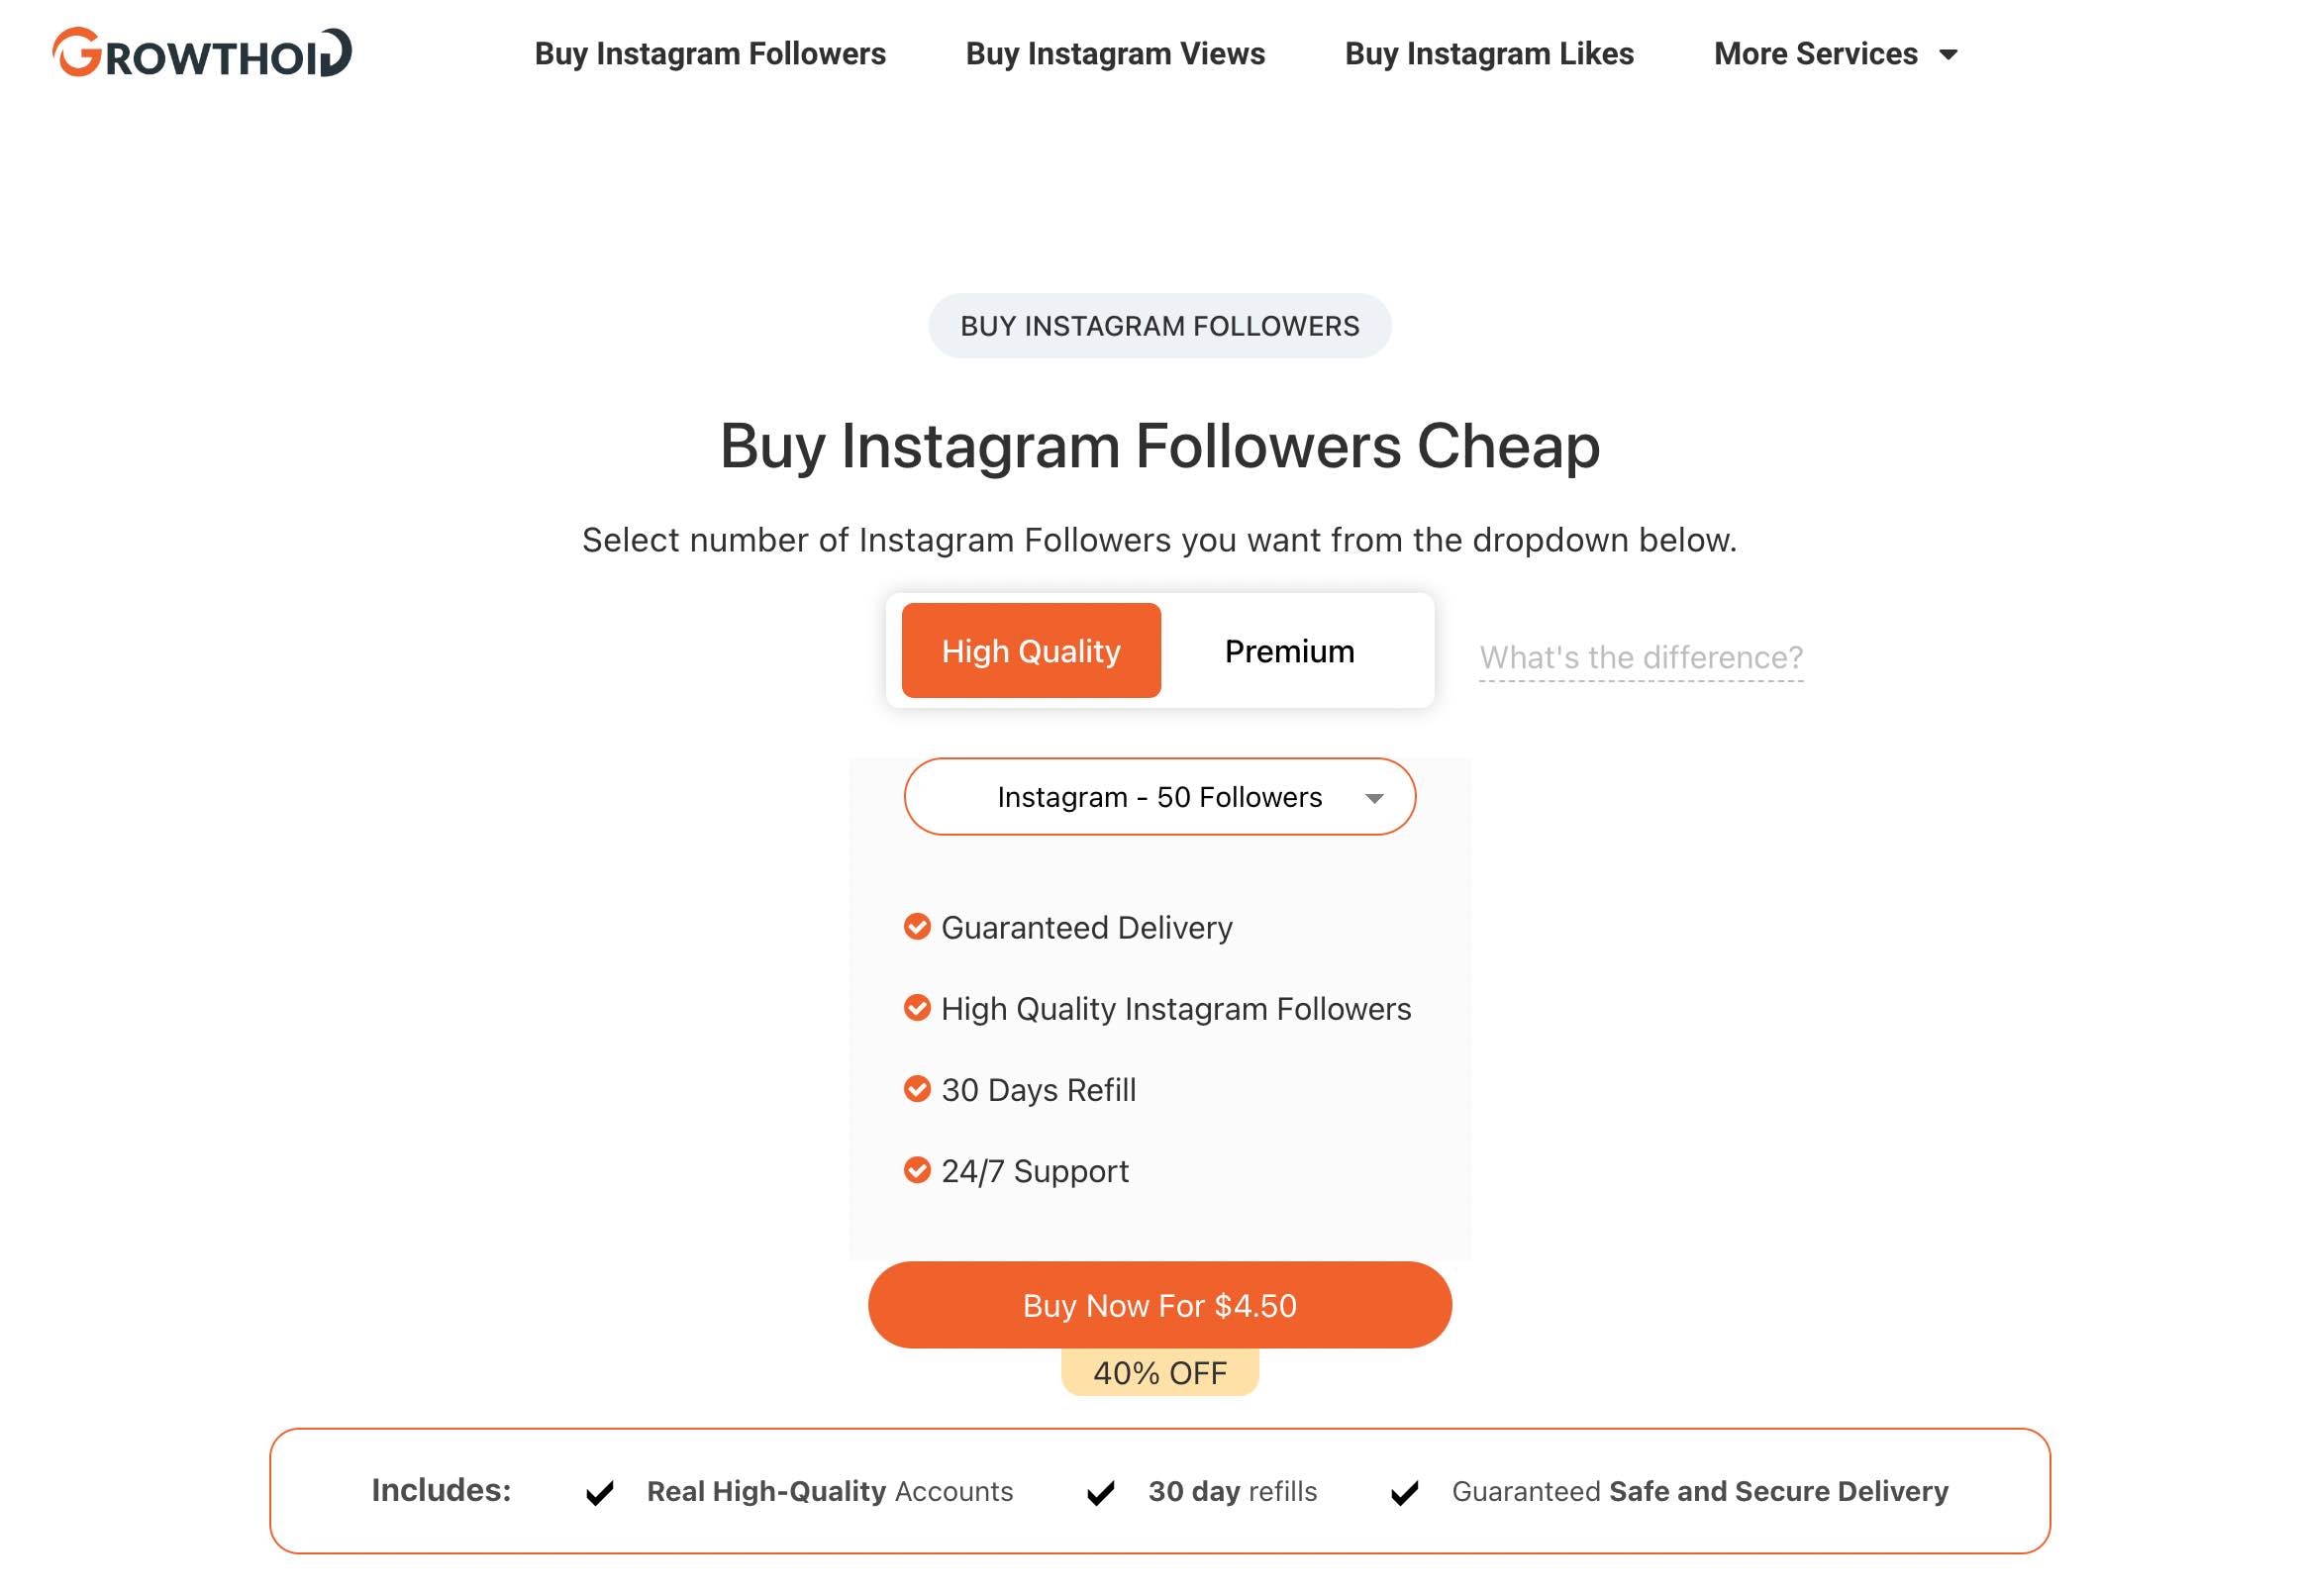 growthoid buy instagram followers ireland page